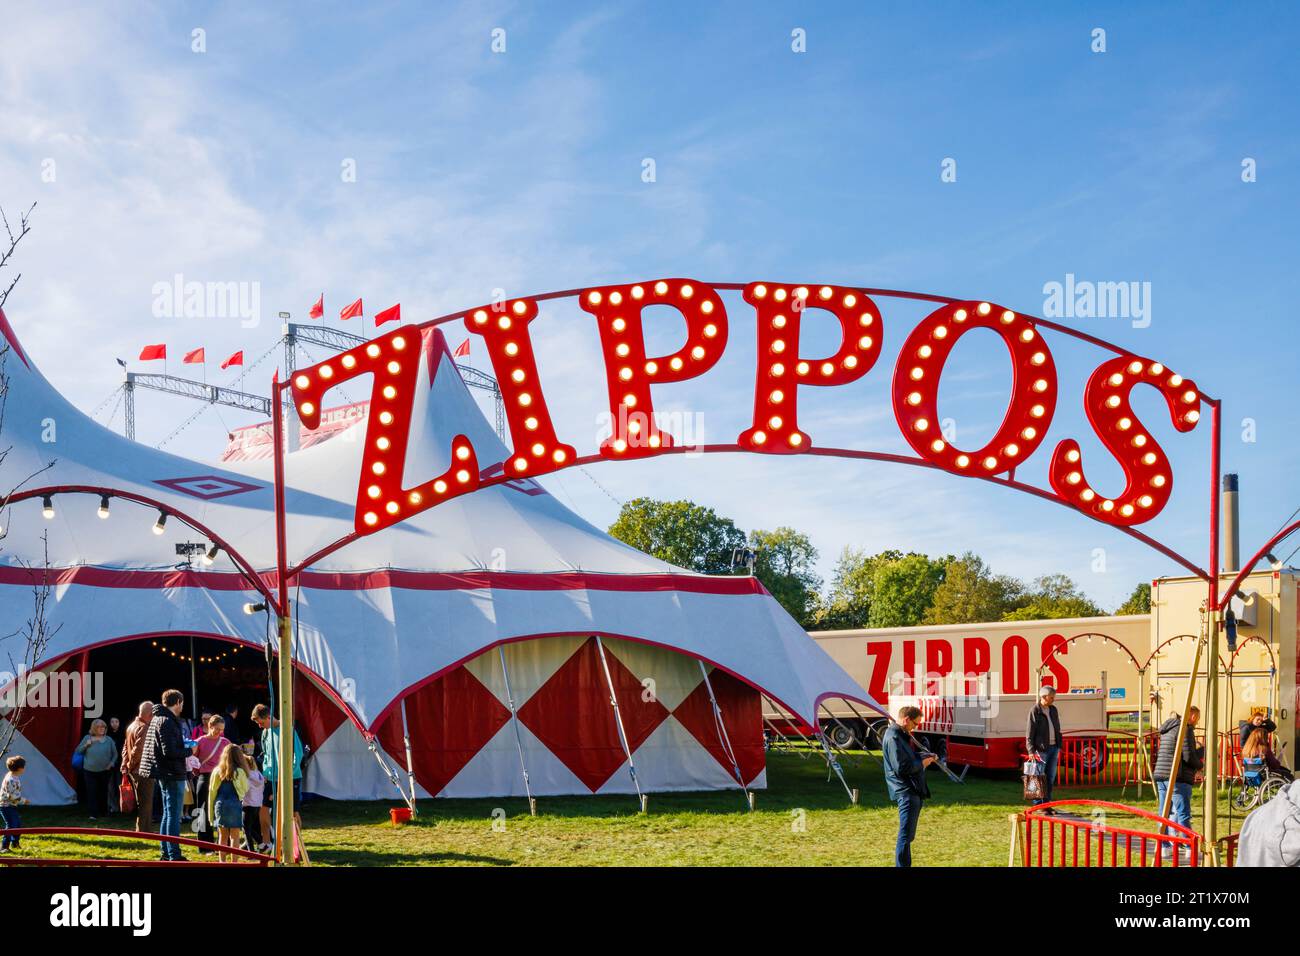 The illuminated name sign at the entrance to Zippos Circus in Guildford on a sunny day with blue sky Stock Photo